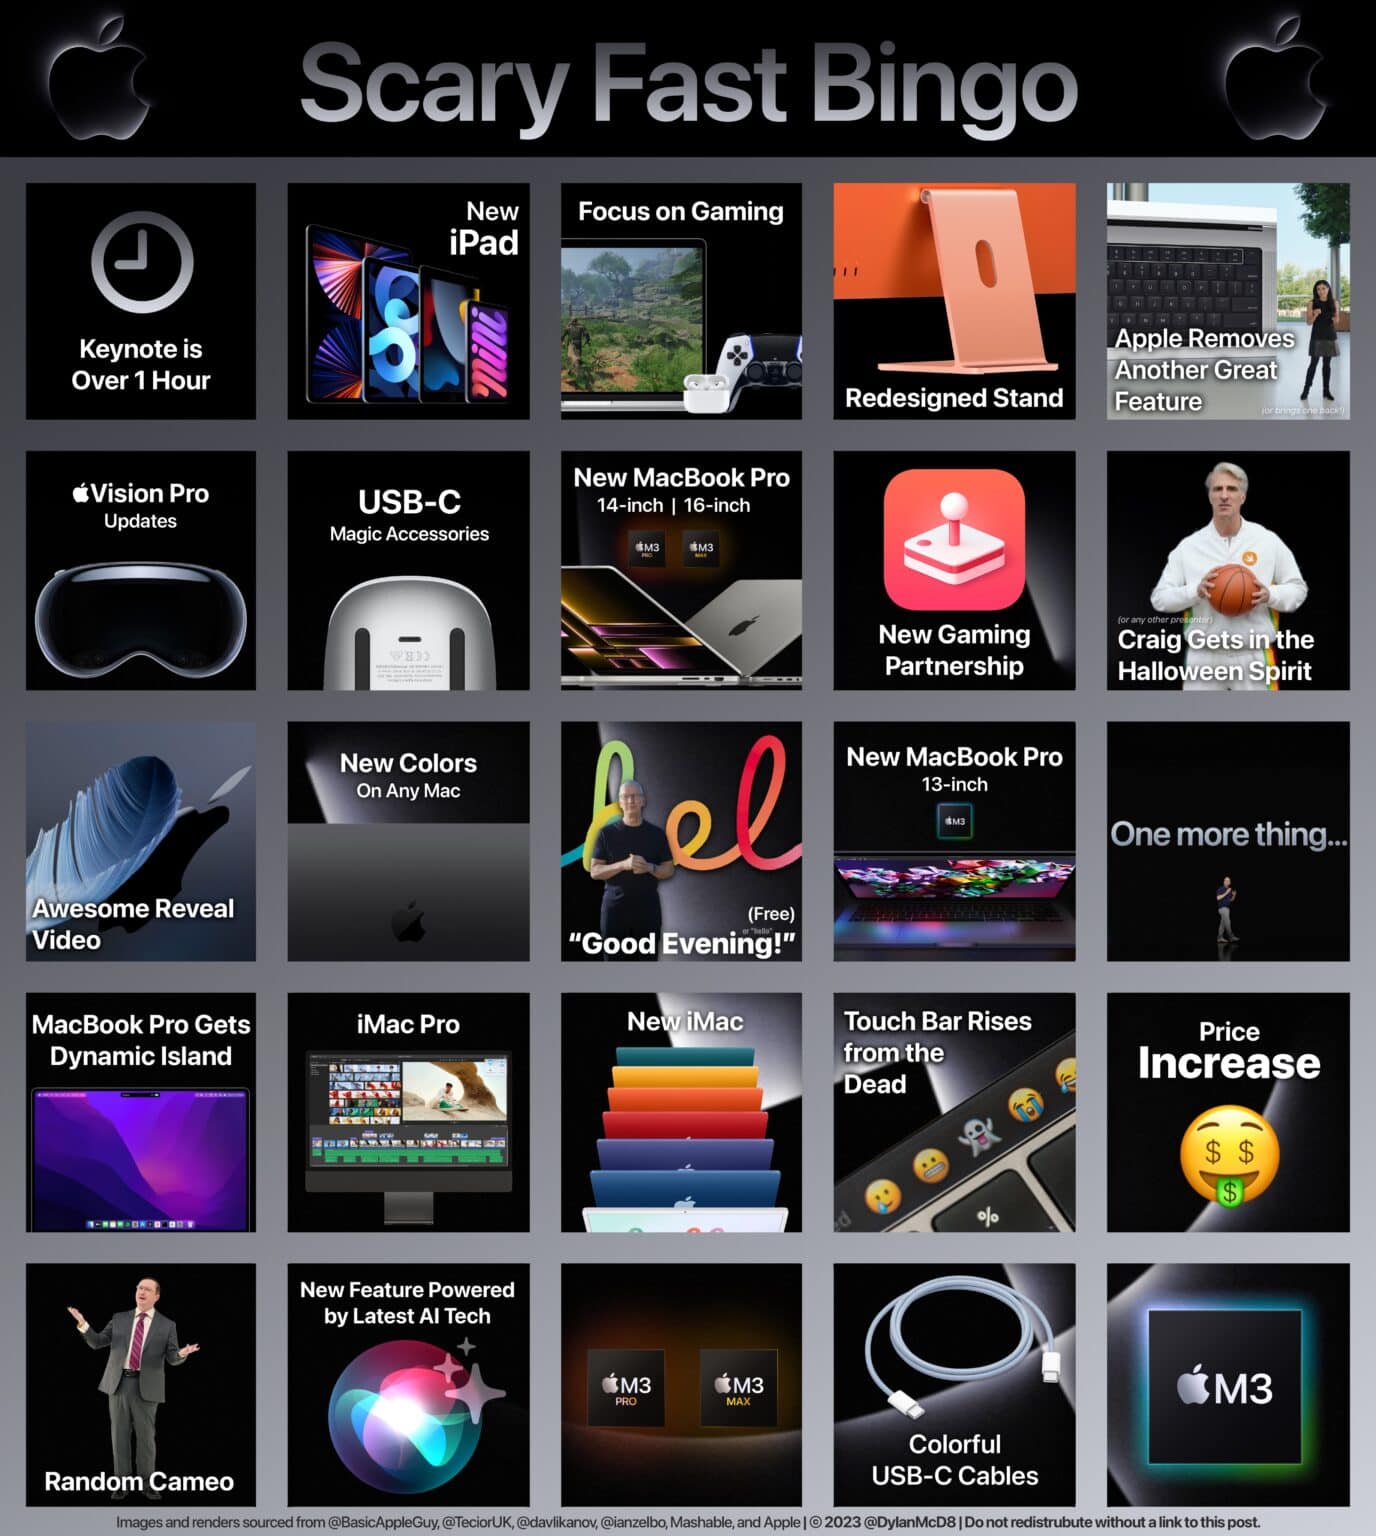 See if you can get bingo tonight during Apple's Scary Fast event.